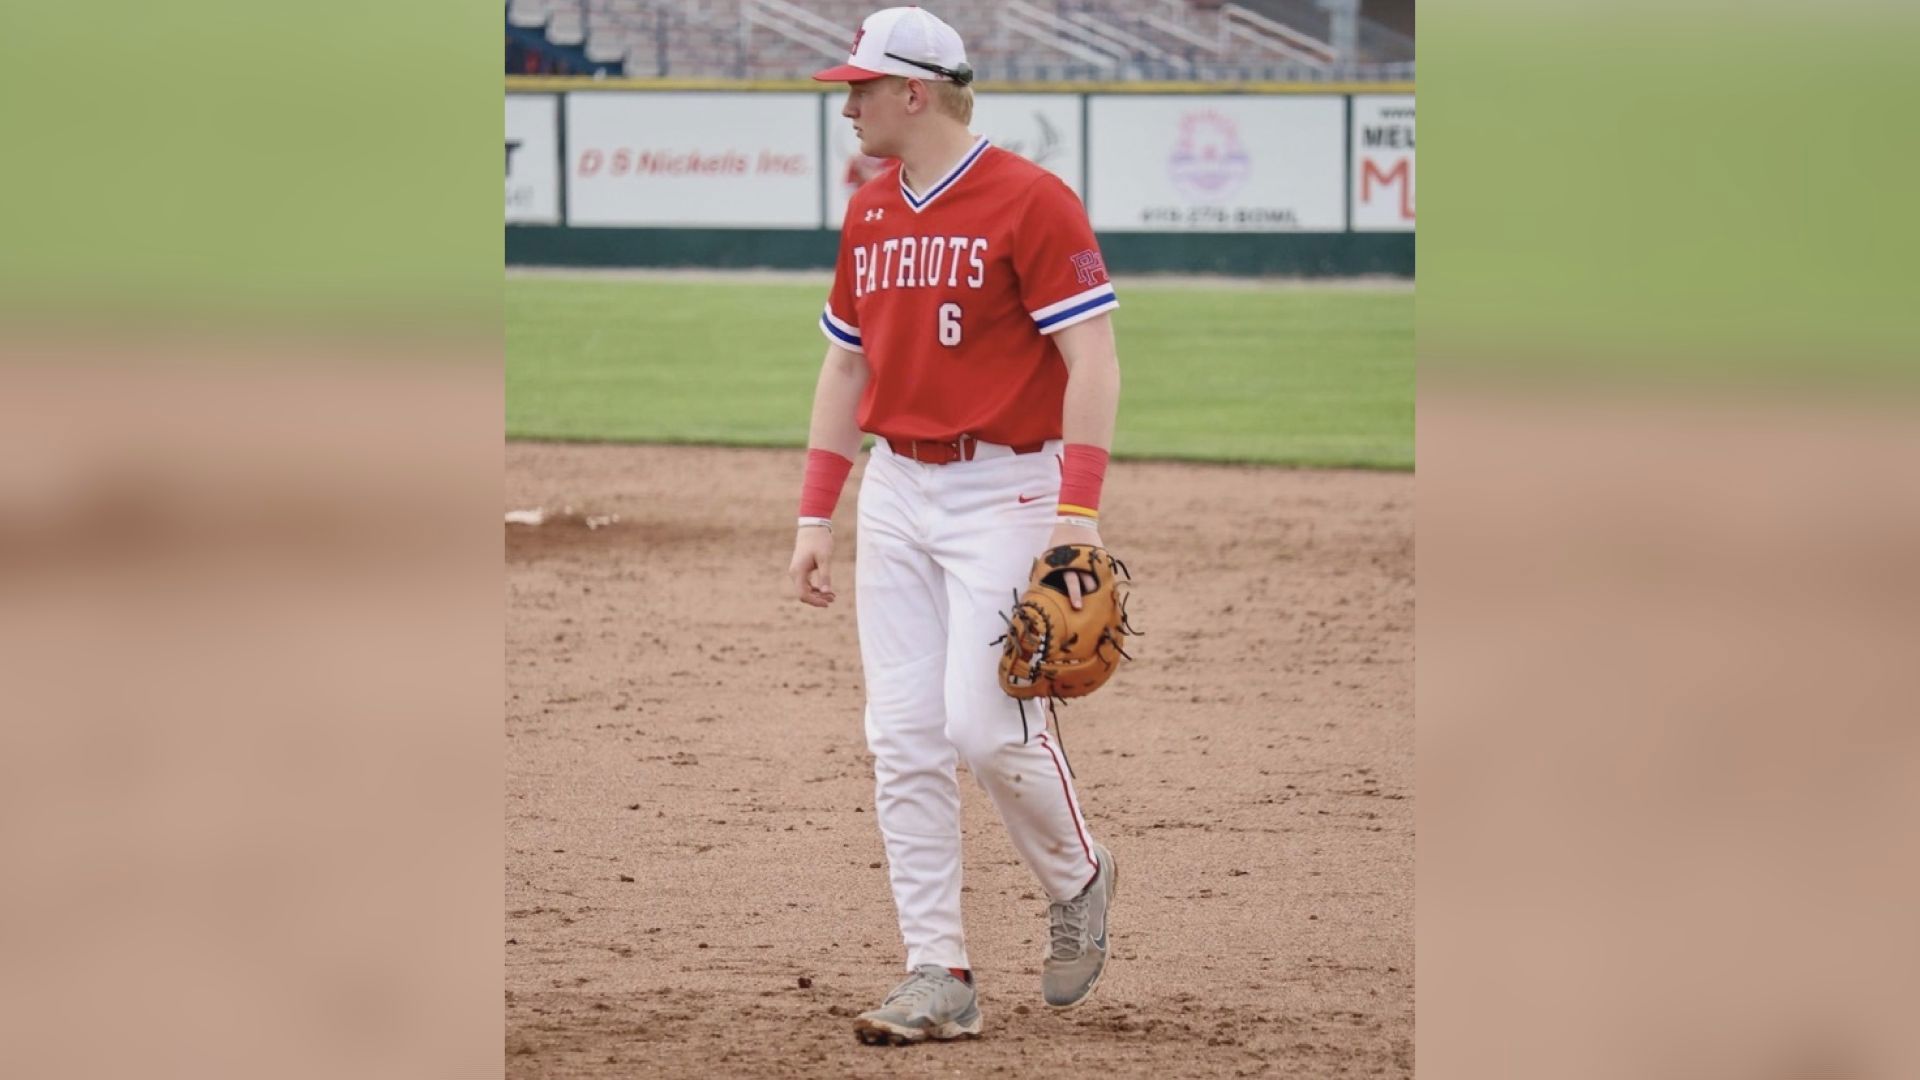 The record-setting athlete tore his meniscus playing football. He recovered in time to earn All-State honors in baseball and just signed to play in college.